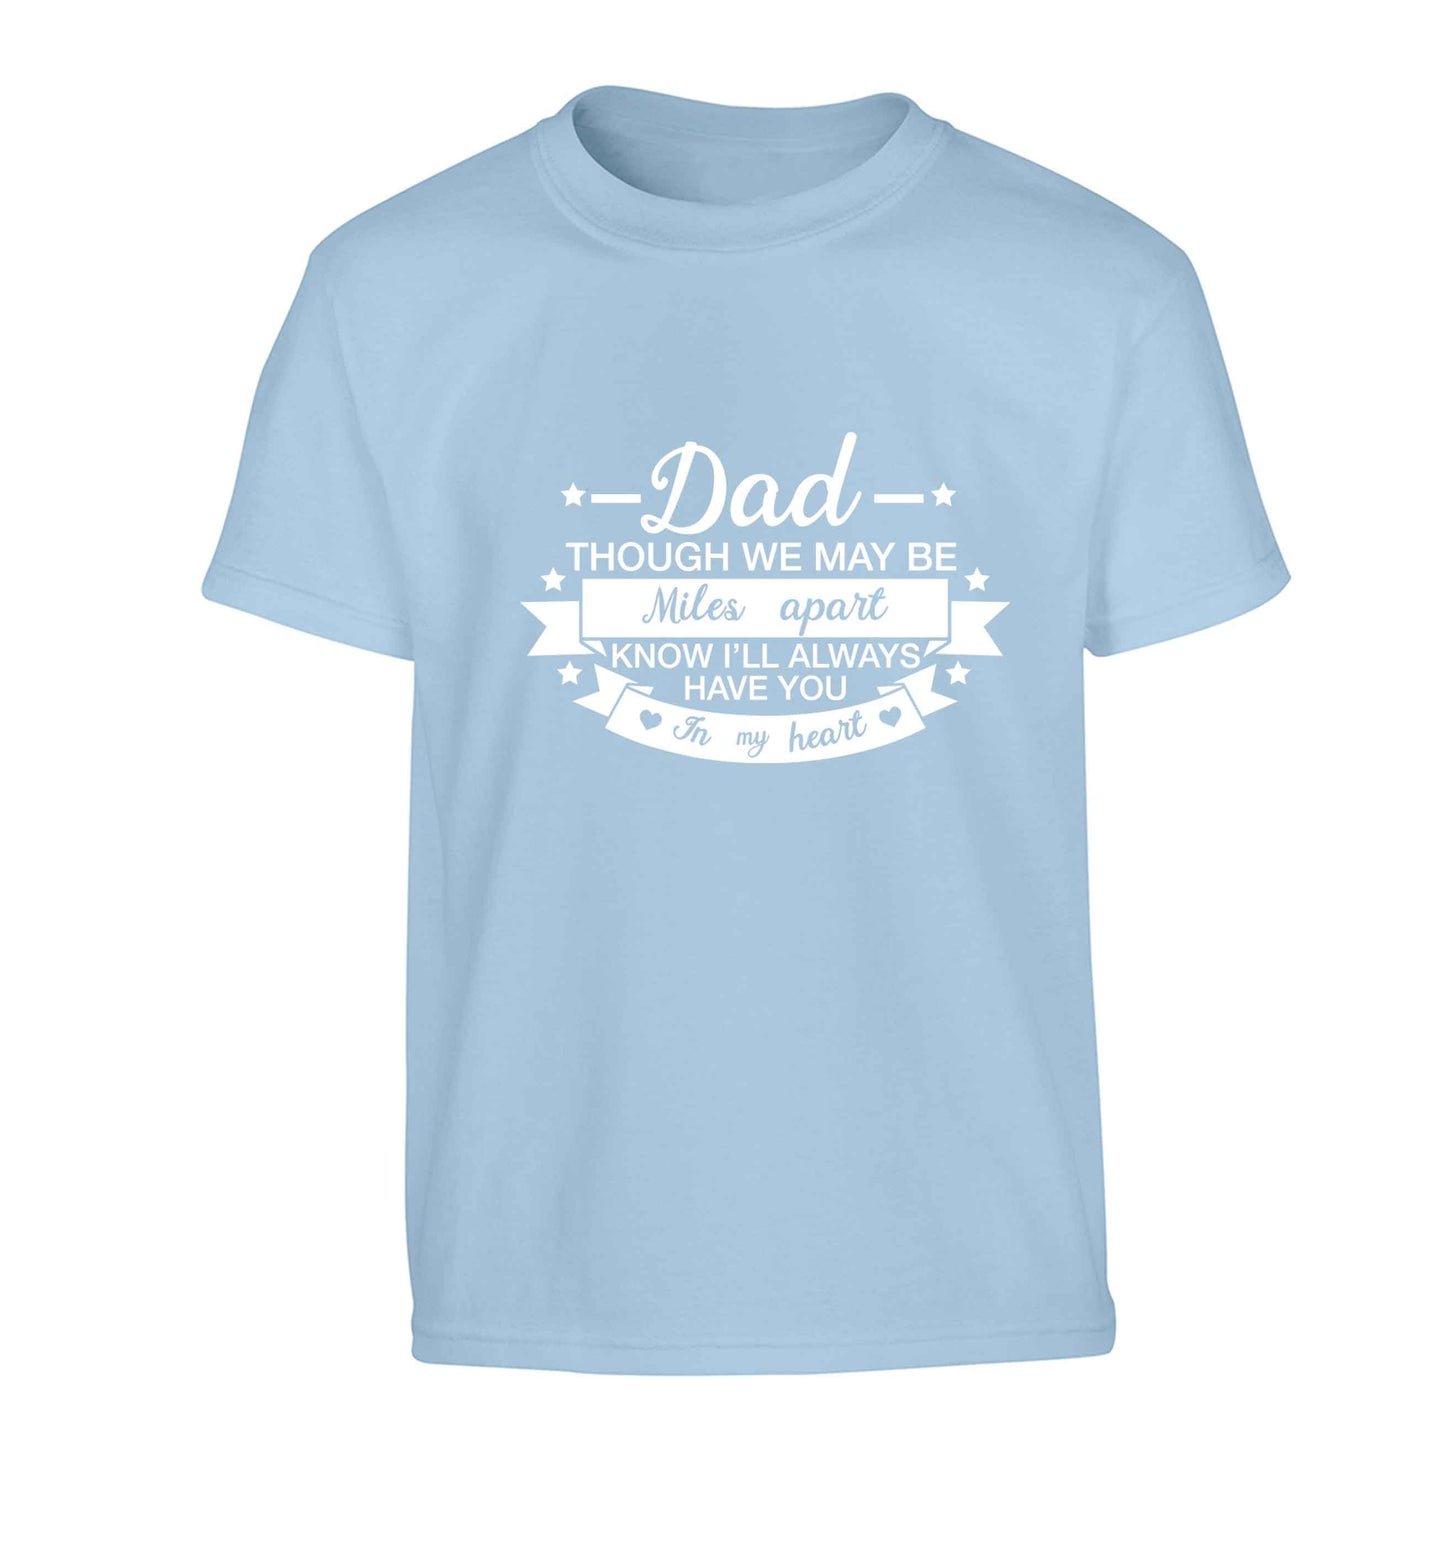 Dad though we are miles apart know I'll always have you in my heart Children's light blue Tshirt 12-13 Years